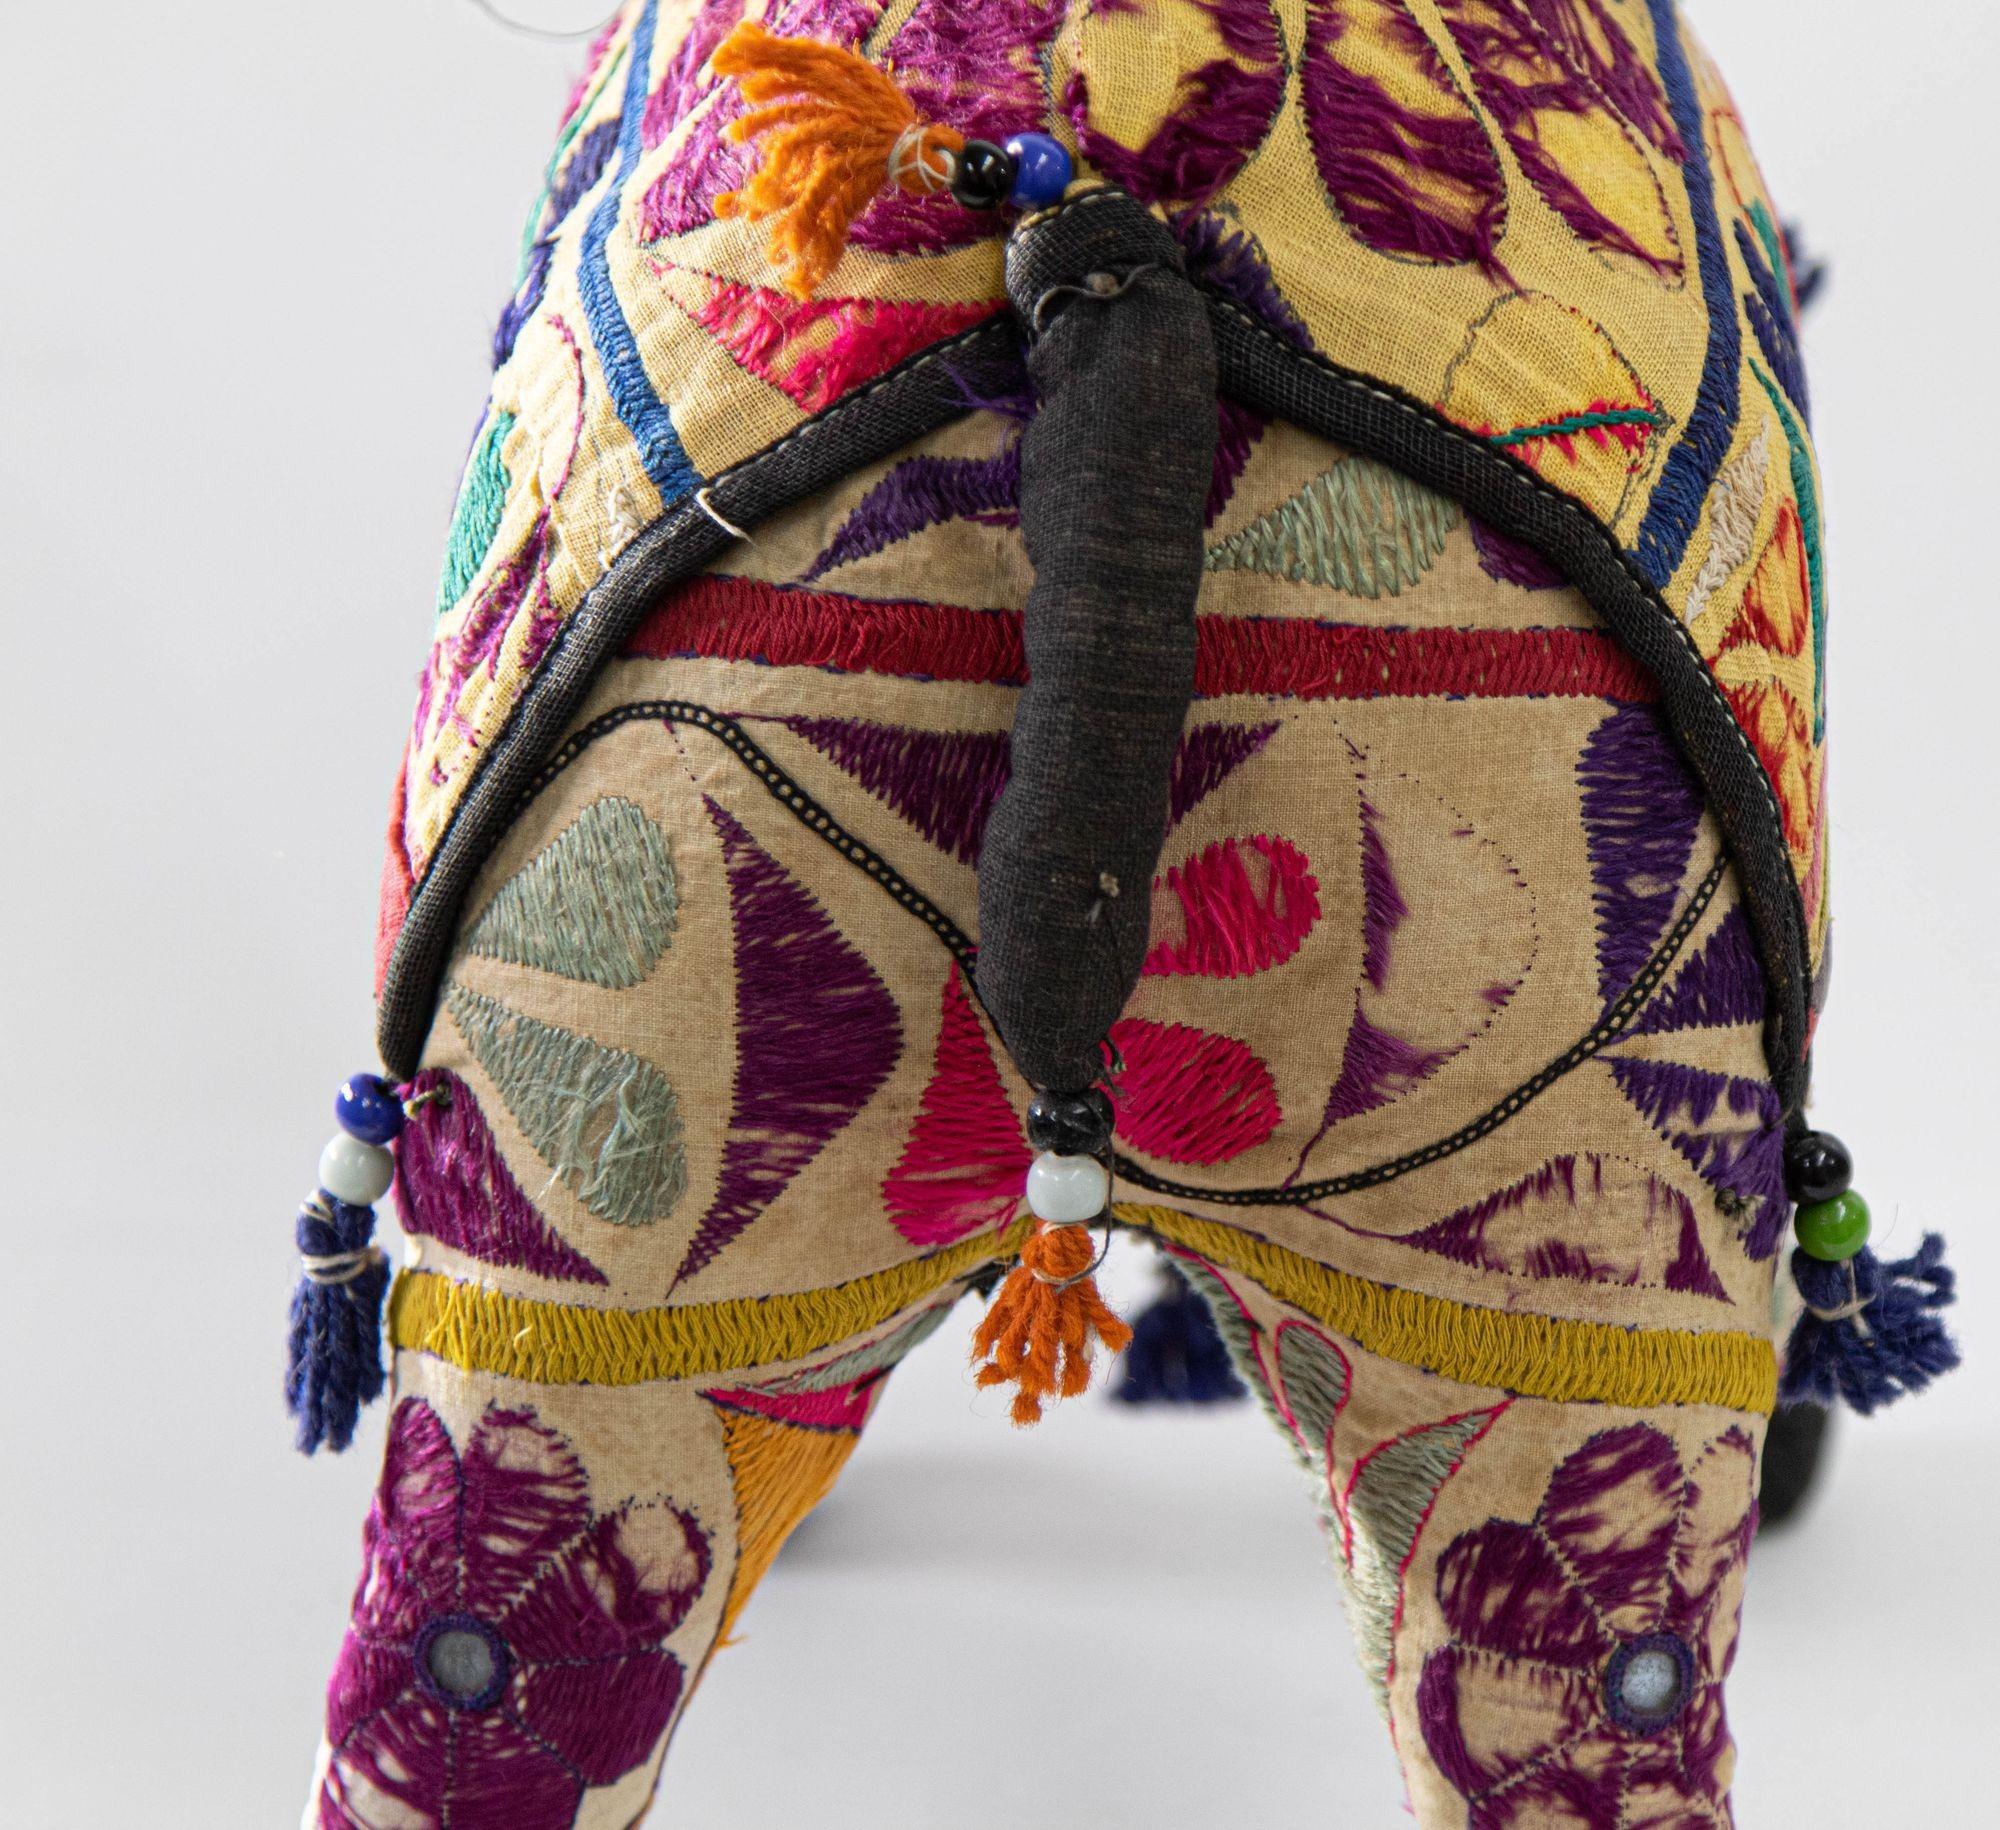 Vintage Handcrafted Stuffed Cotton Embroidered Ceremonial Elephant Toy Raj India en vente 3